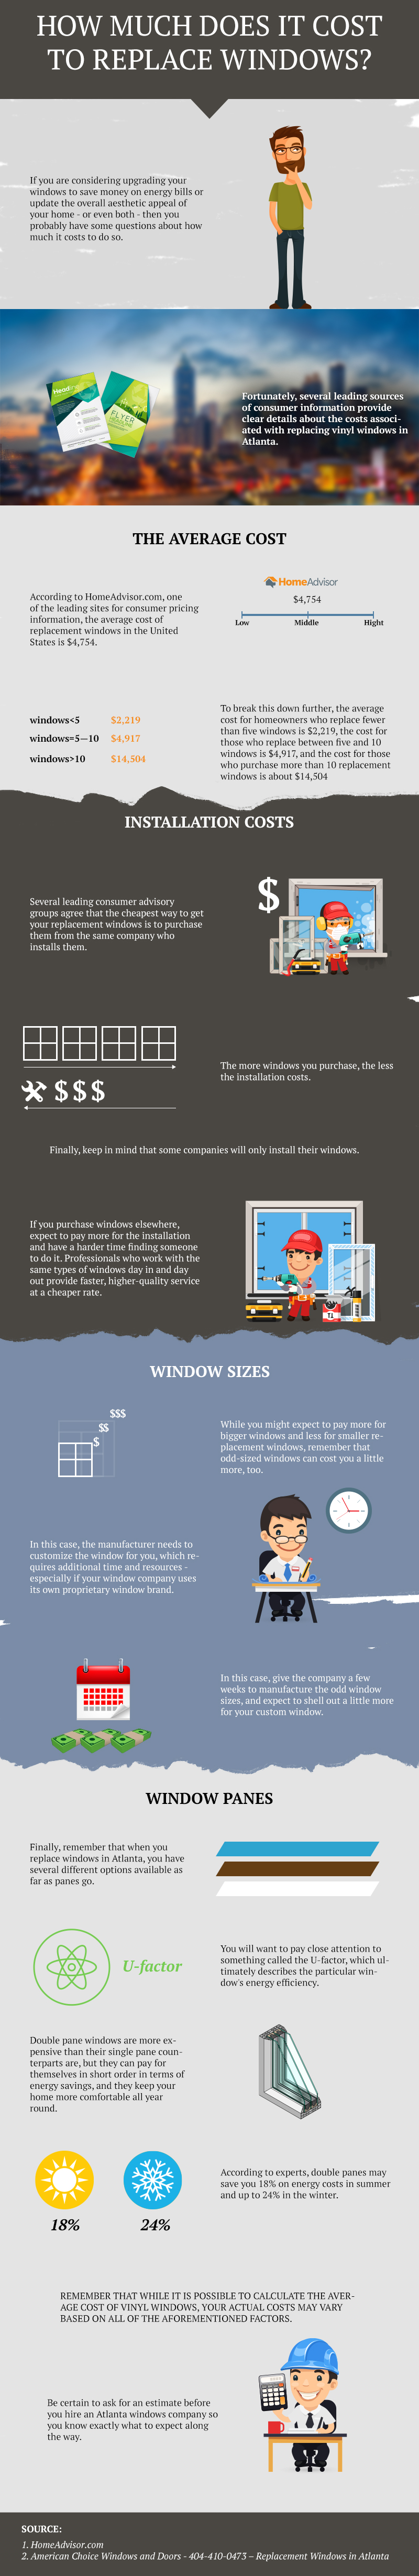 How Much Does it Cost to Replace Windows? Visual.ly